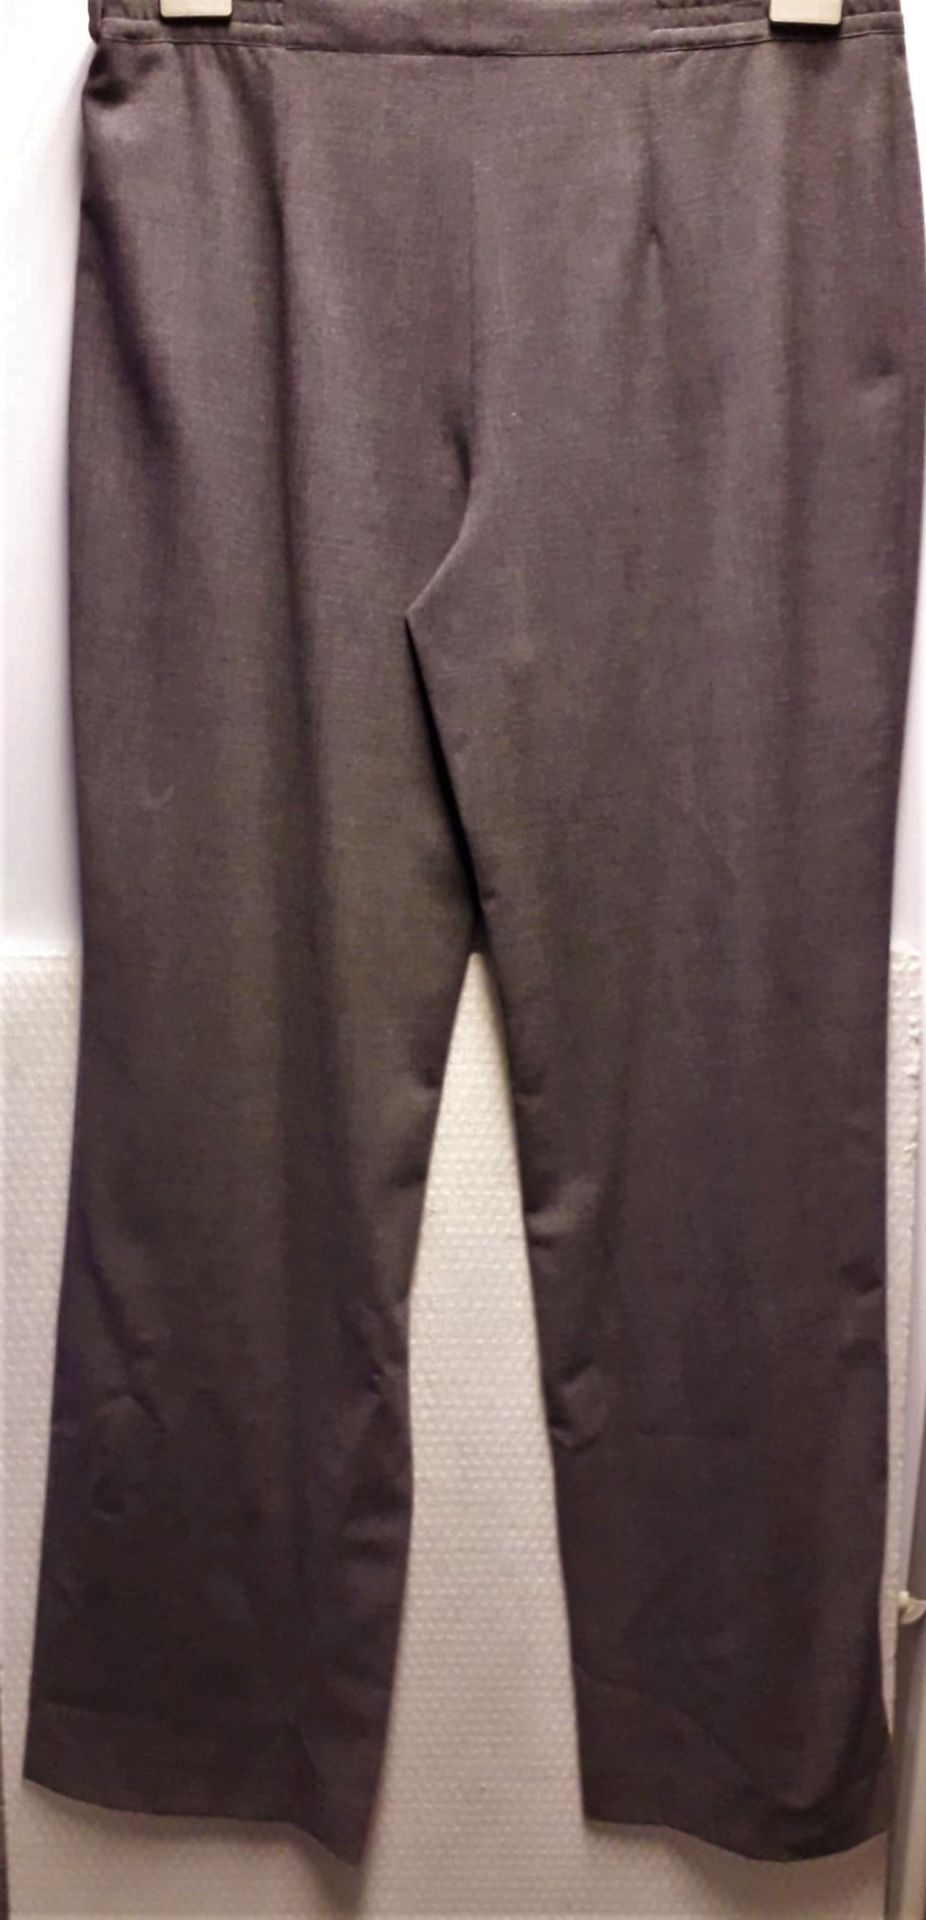 1 x Natan Plus Charcoal Trousers - Size: 52 - Material: 96% Virgin Wool, 4% Elastane - From a High